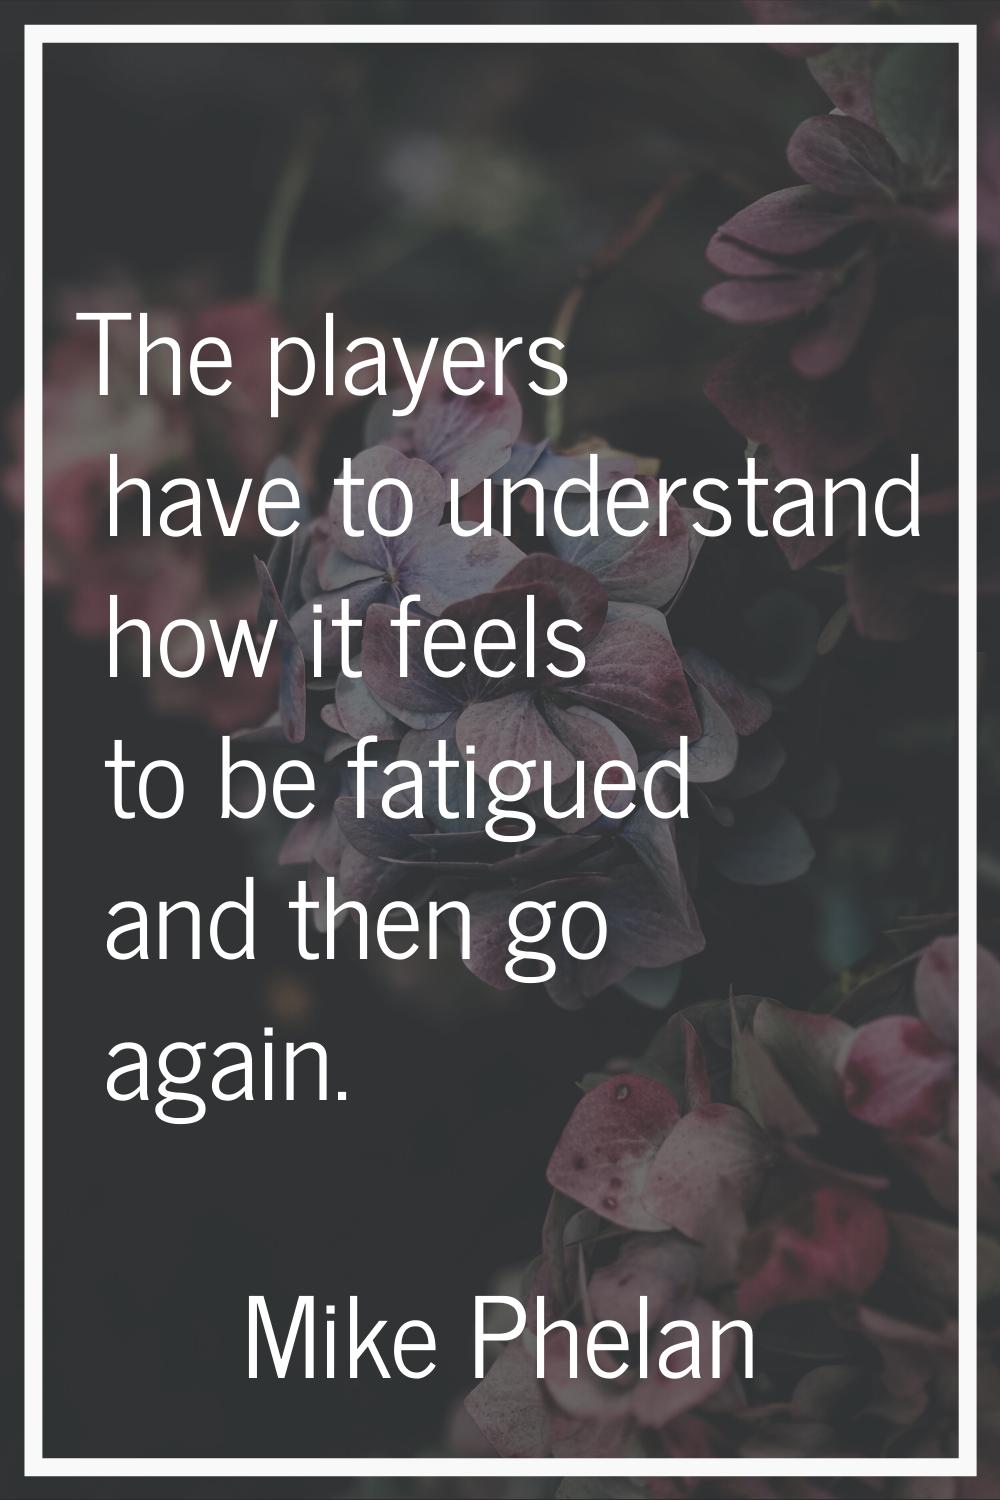 The players have to understand how it feels to be fatigued and then go again.